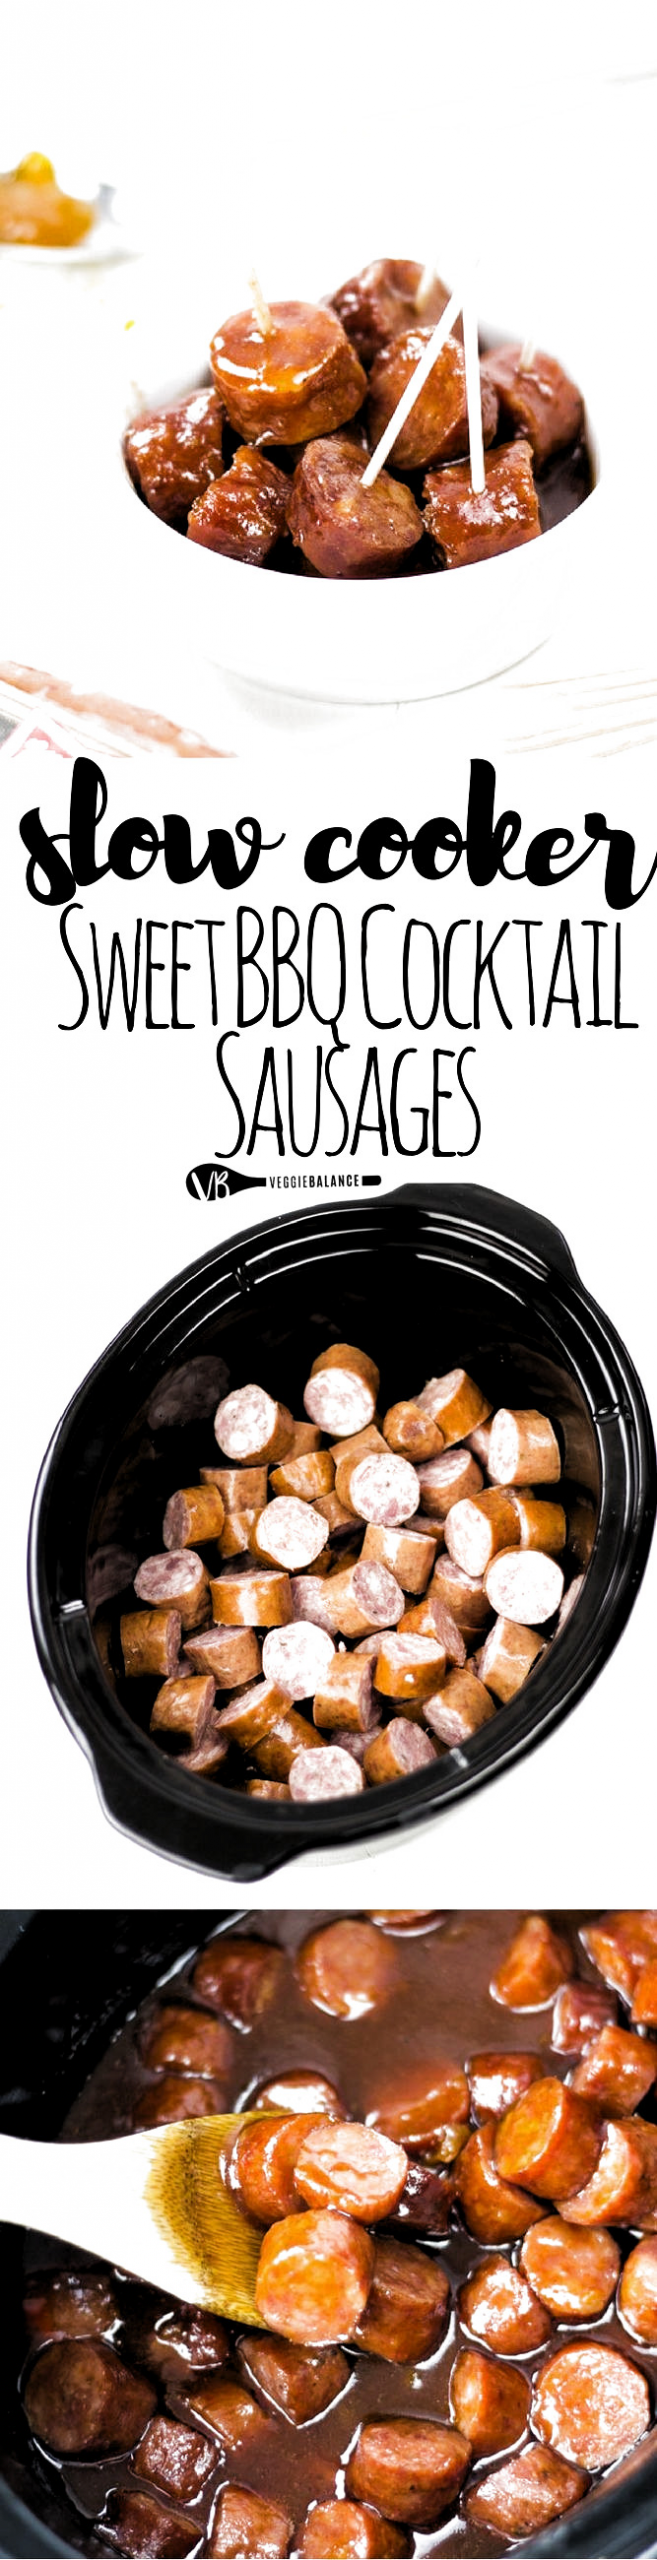 14 Easy Slow Cooker Appetizers
 Slow Cooker Sweet BBQ Cocktail Sausages are a super easy